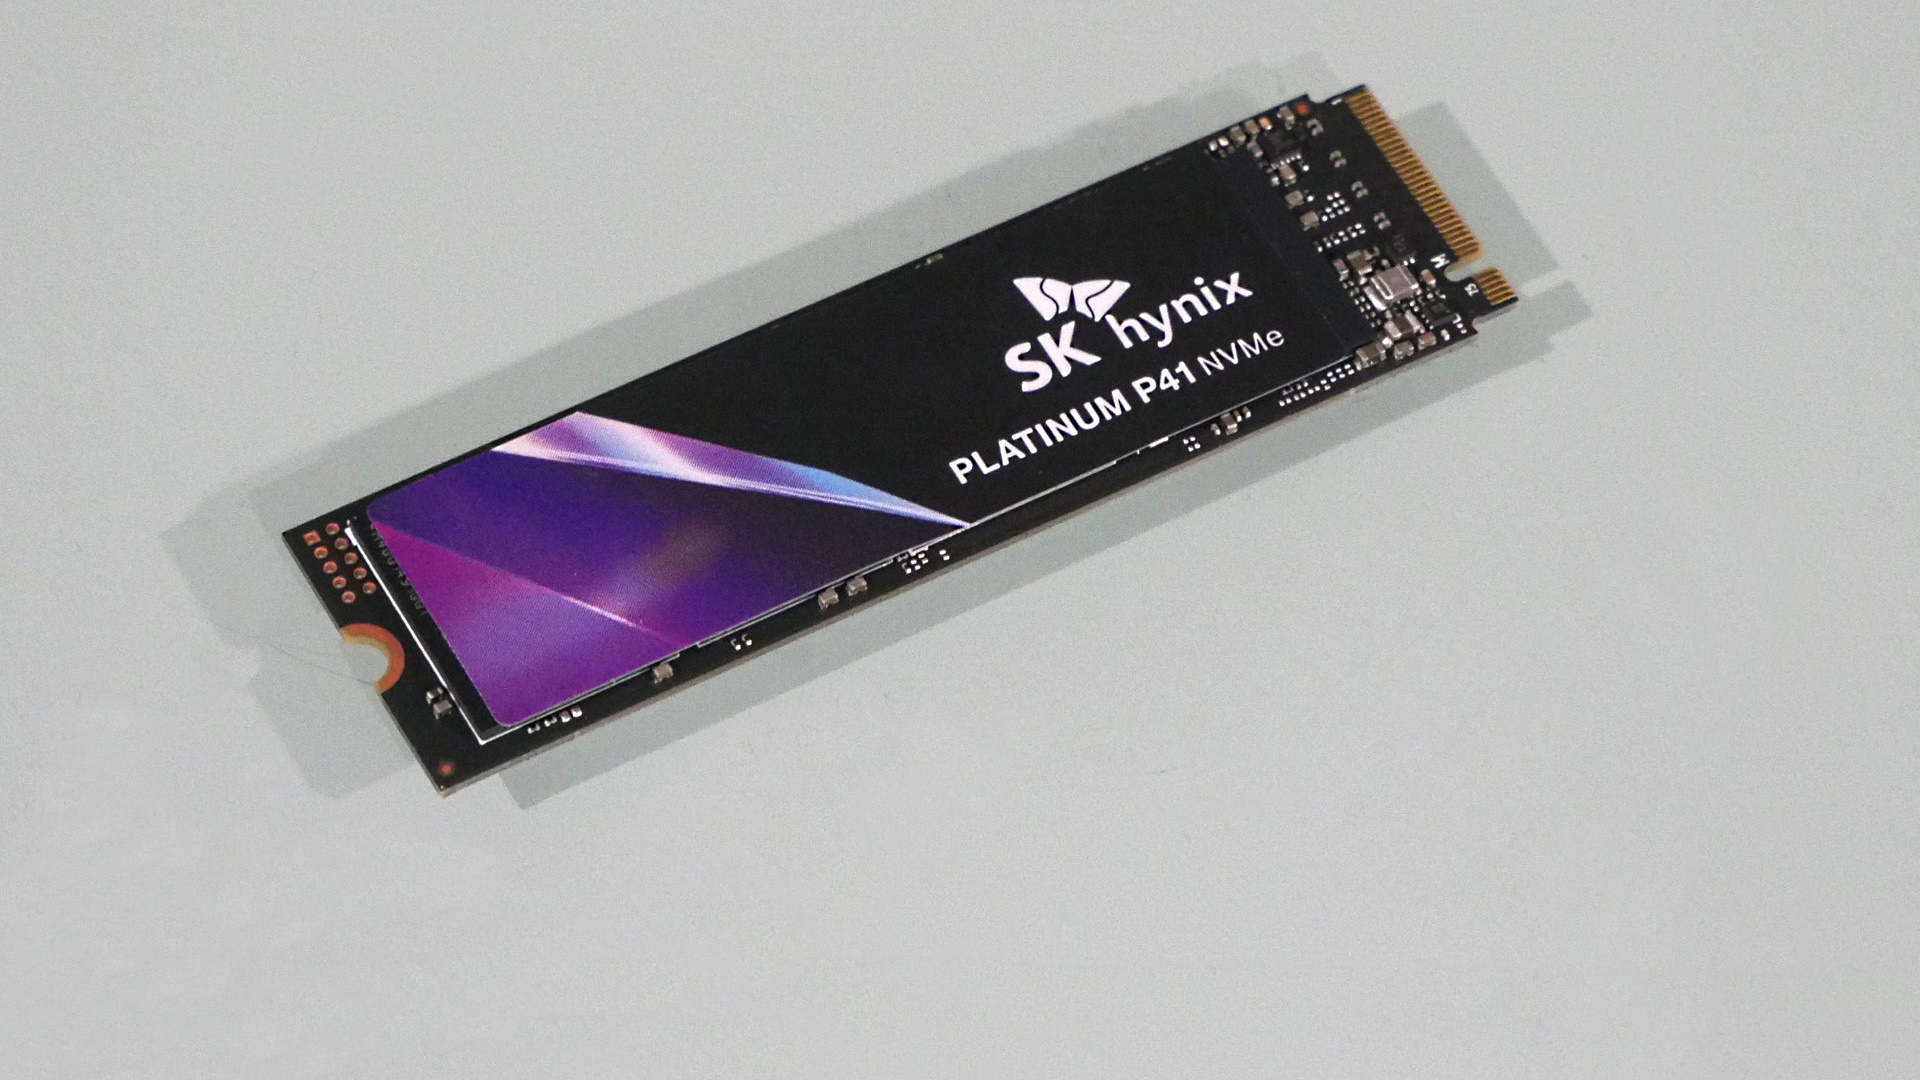 SK Hynix throws a spanner into Western Digital’s plan to merge with Kioxia, but it might not be game over just yet